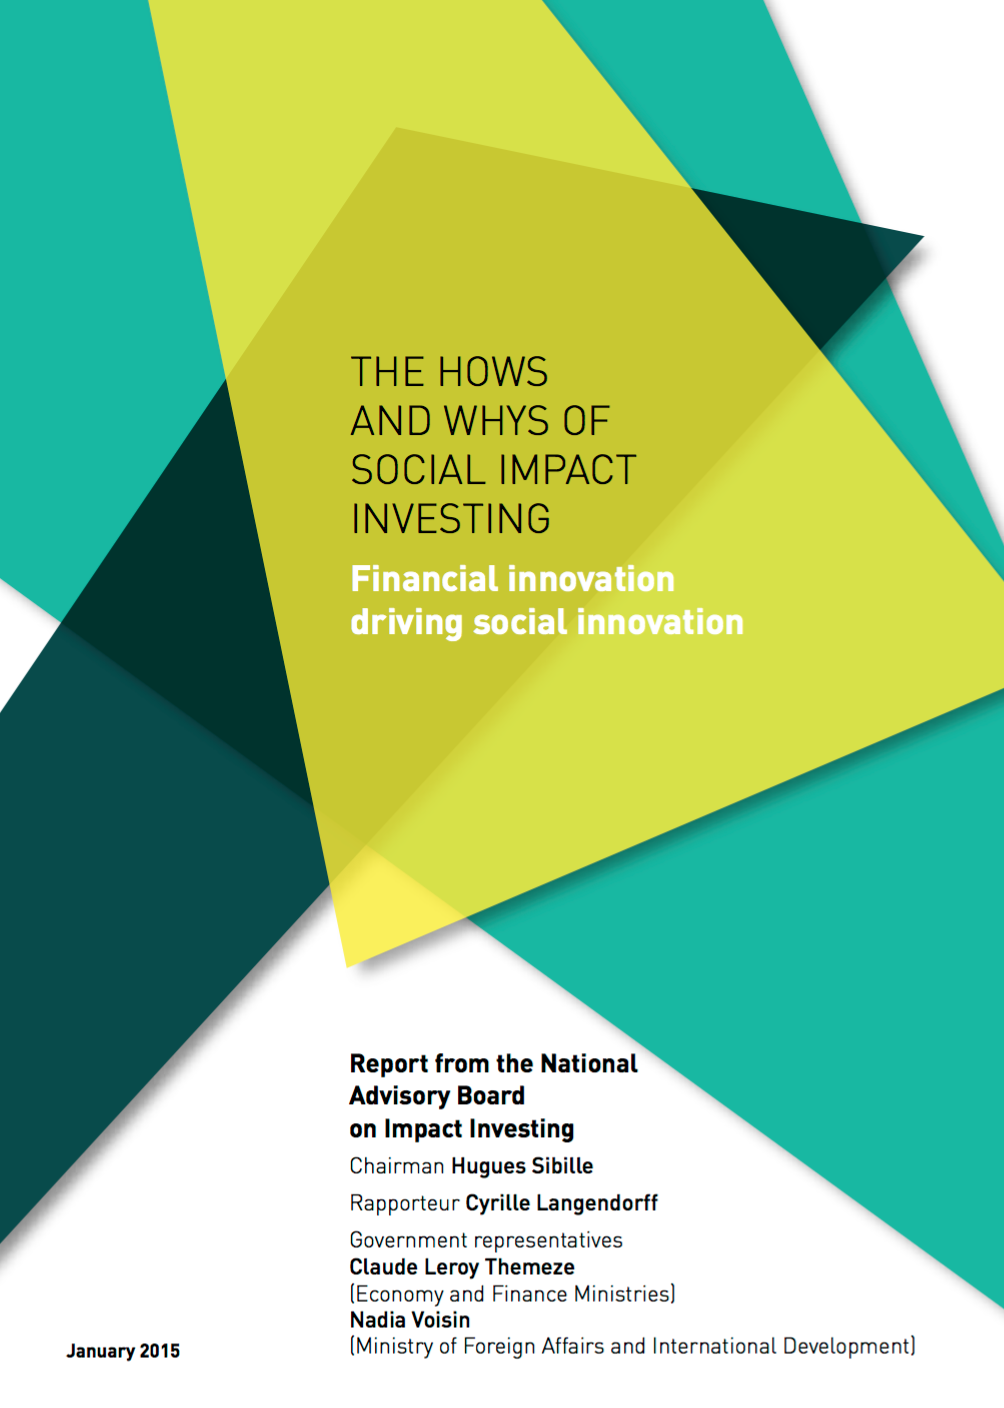 The Hows and Why of Social Impact Investing